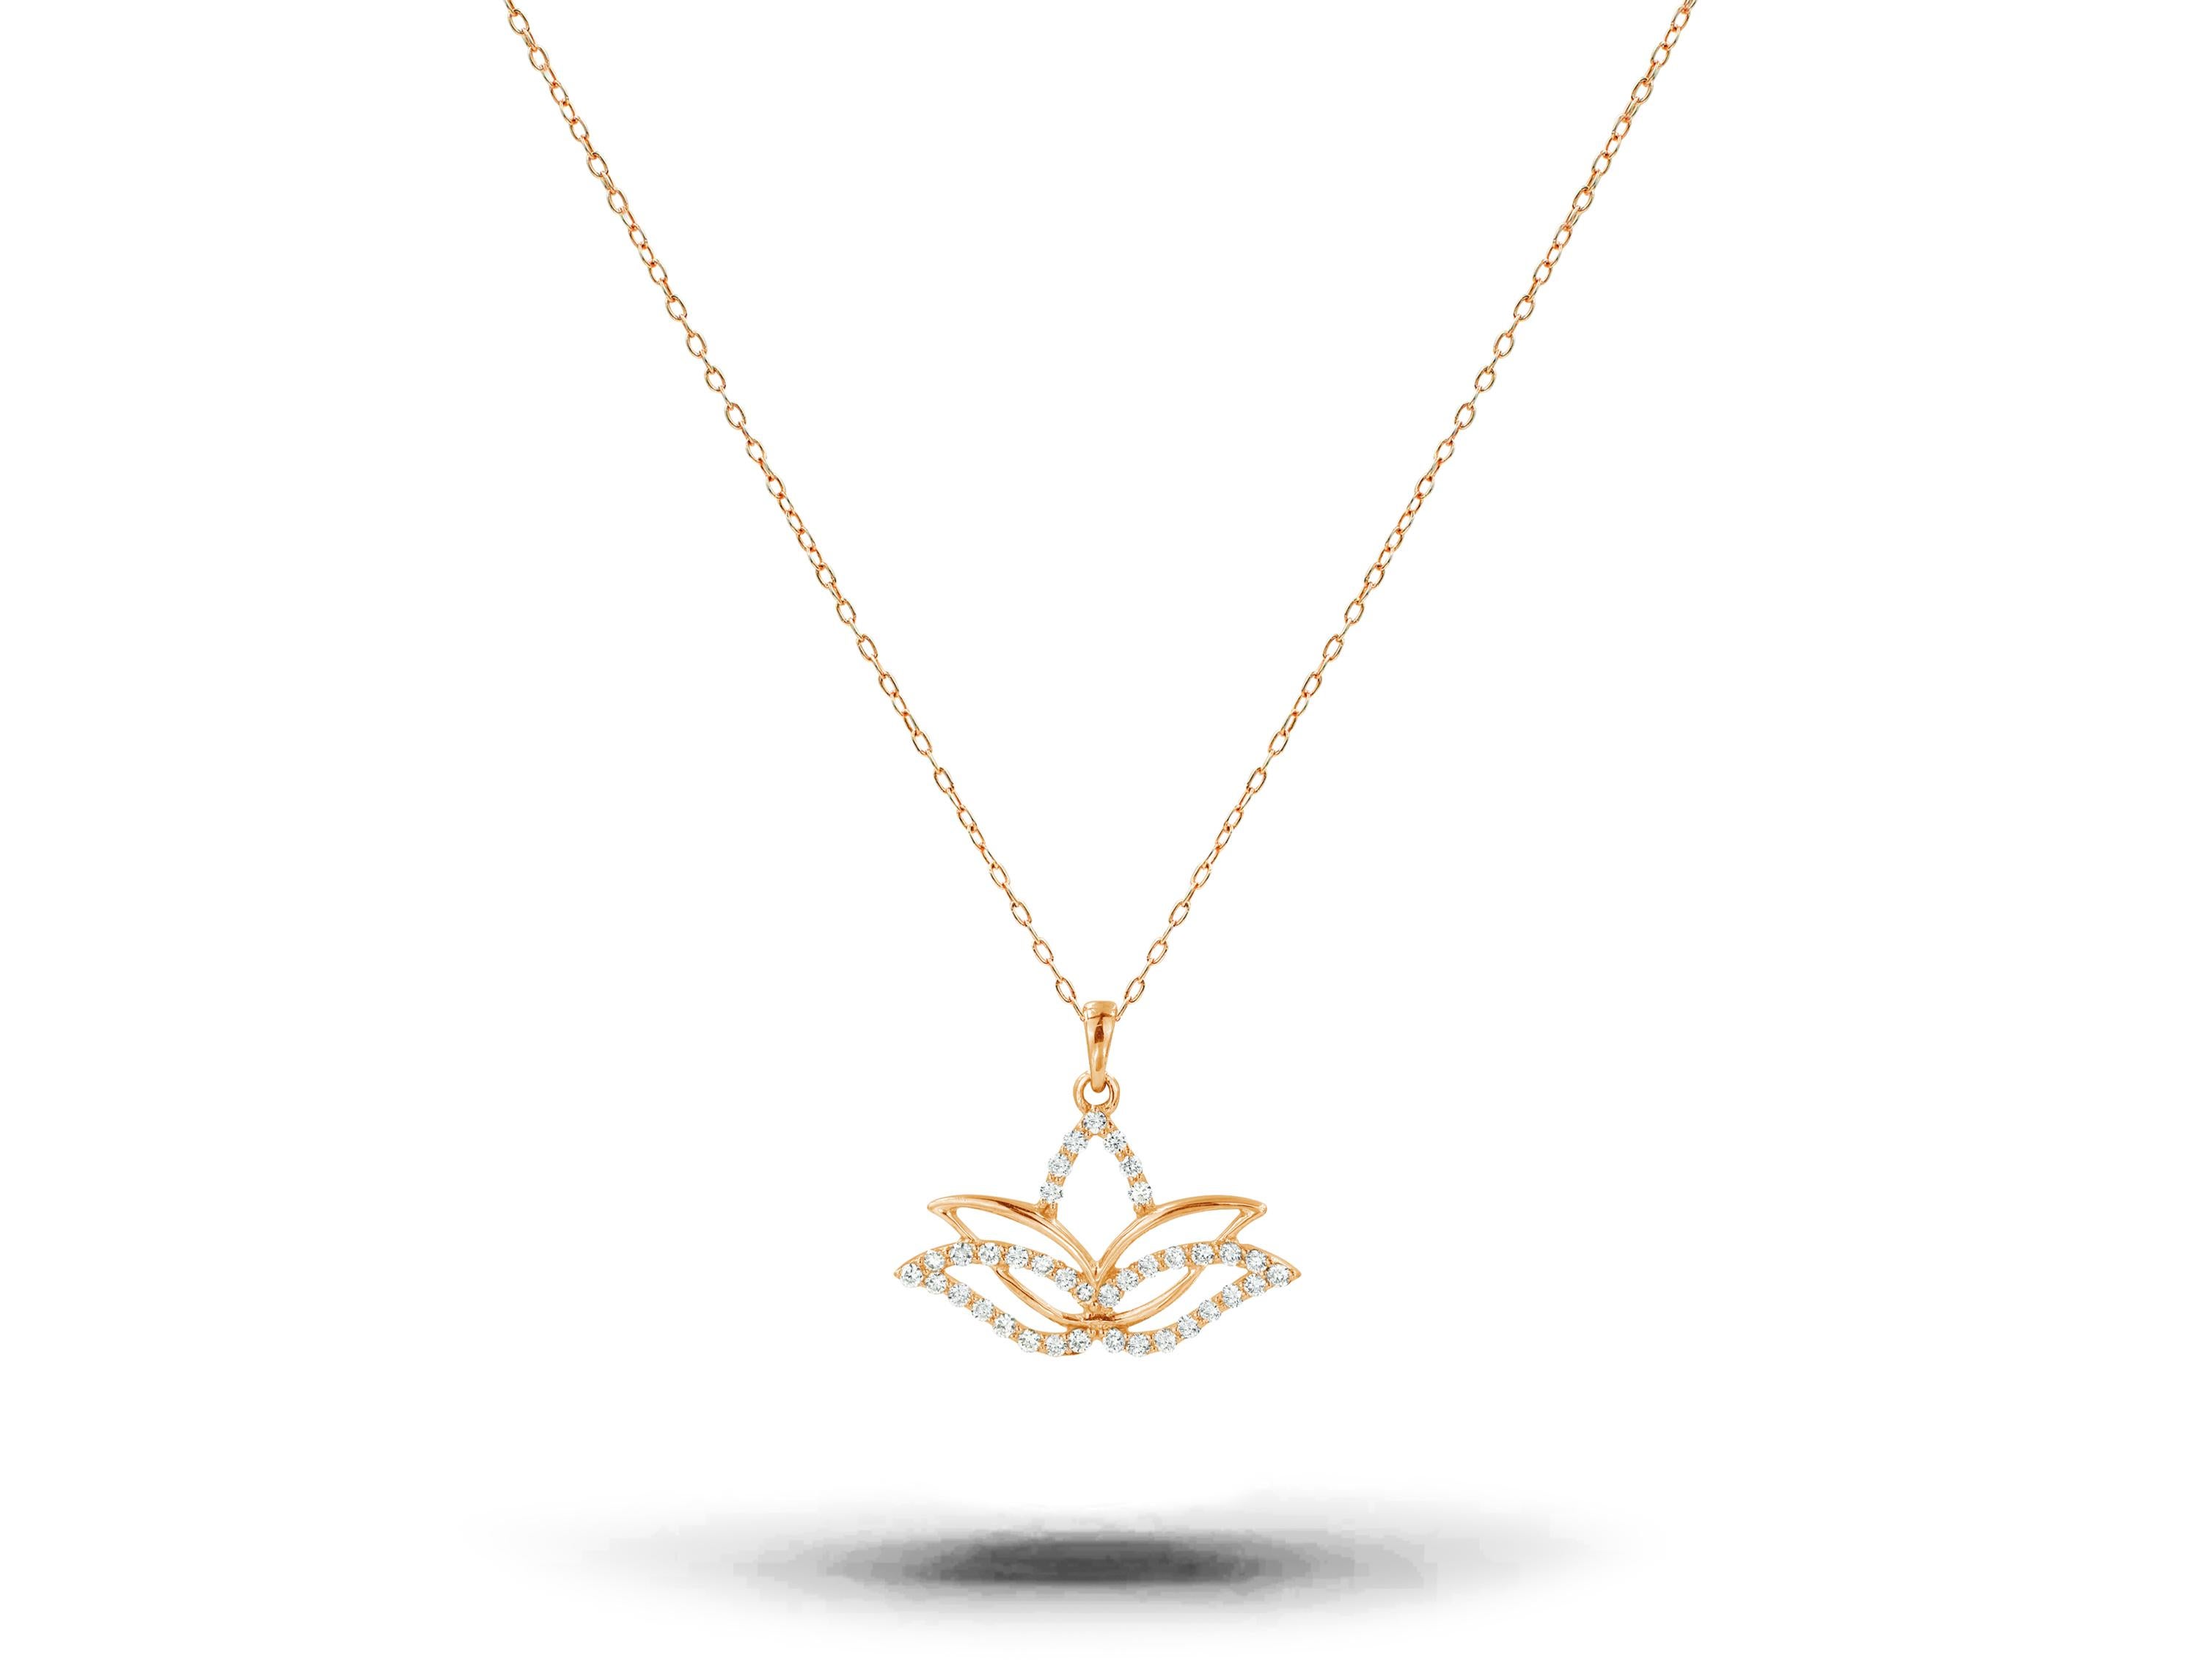 Diamond Lotus Flower Necklace is made of 14k solid gold available in three colors of gold, White Gold / Rose Gold / Yellow Gold.

Lightweight and gorgeous natural genuine diamond. Each diamond is hand selected by me to ensure quality and set by a